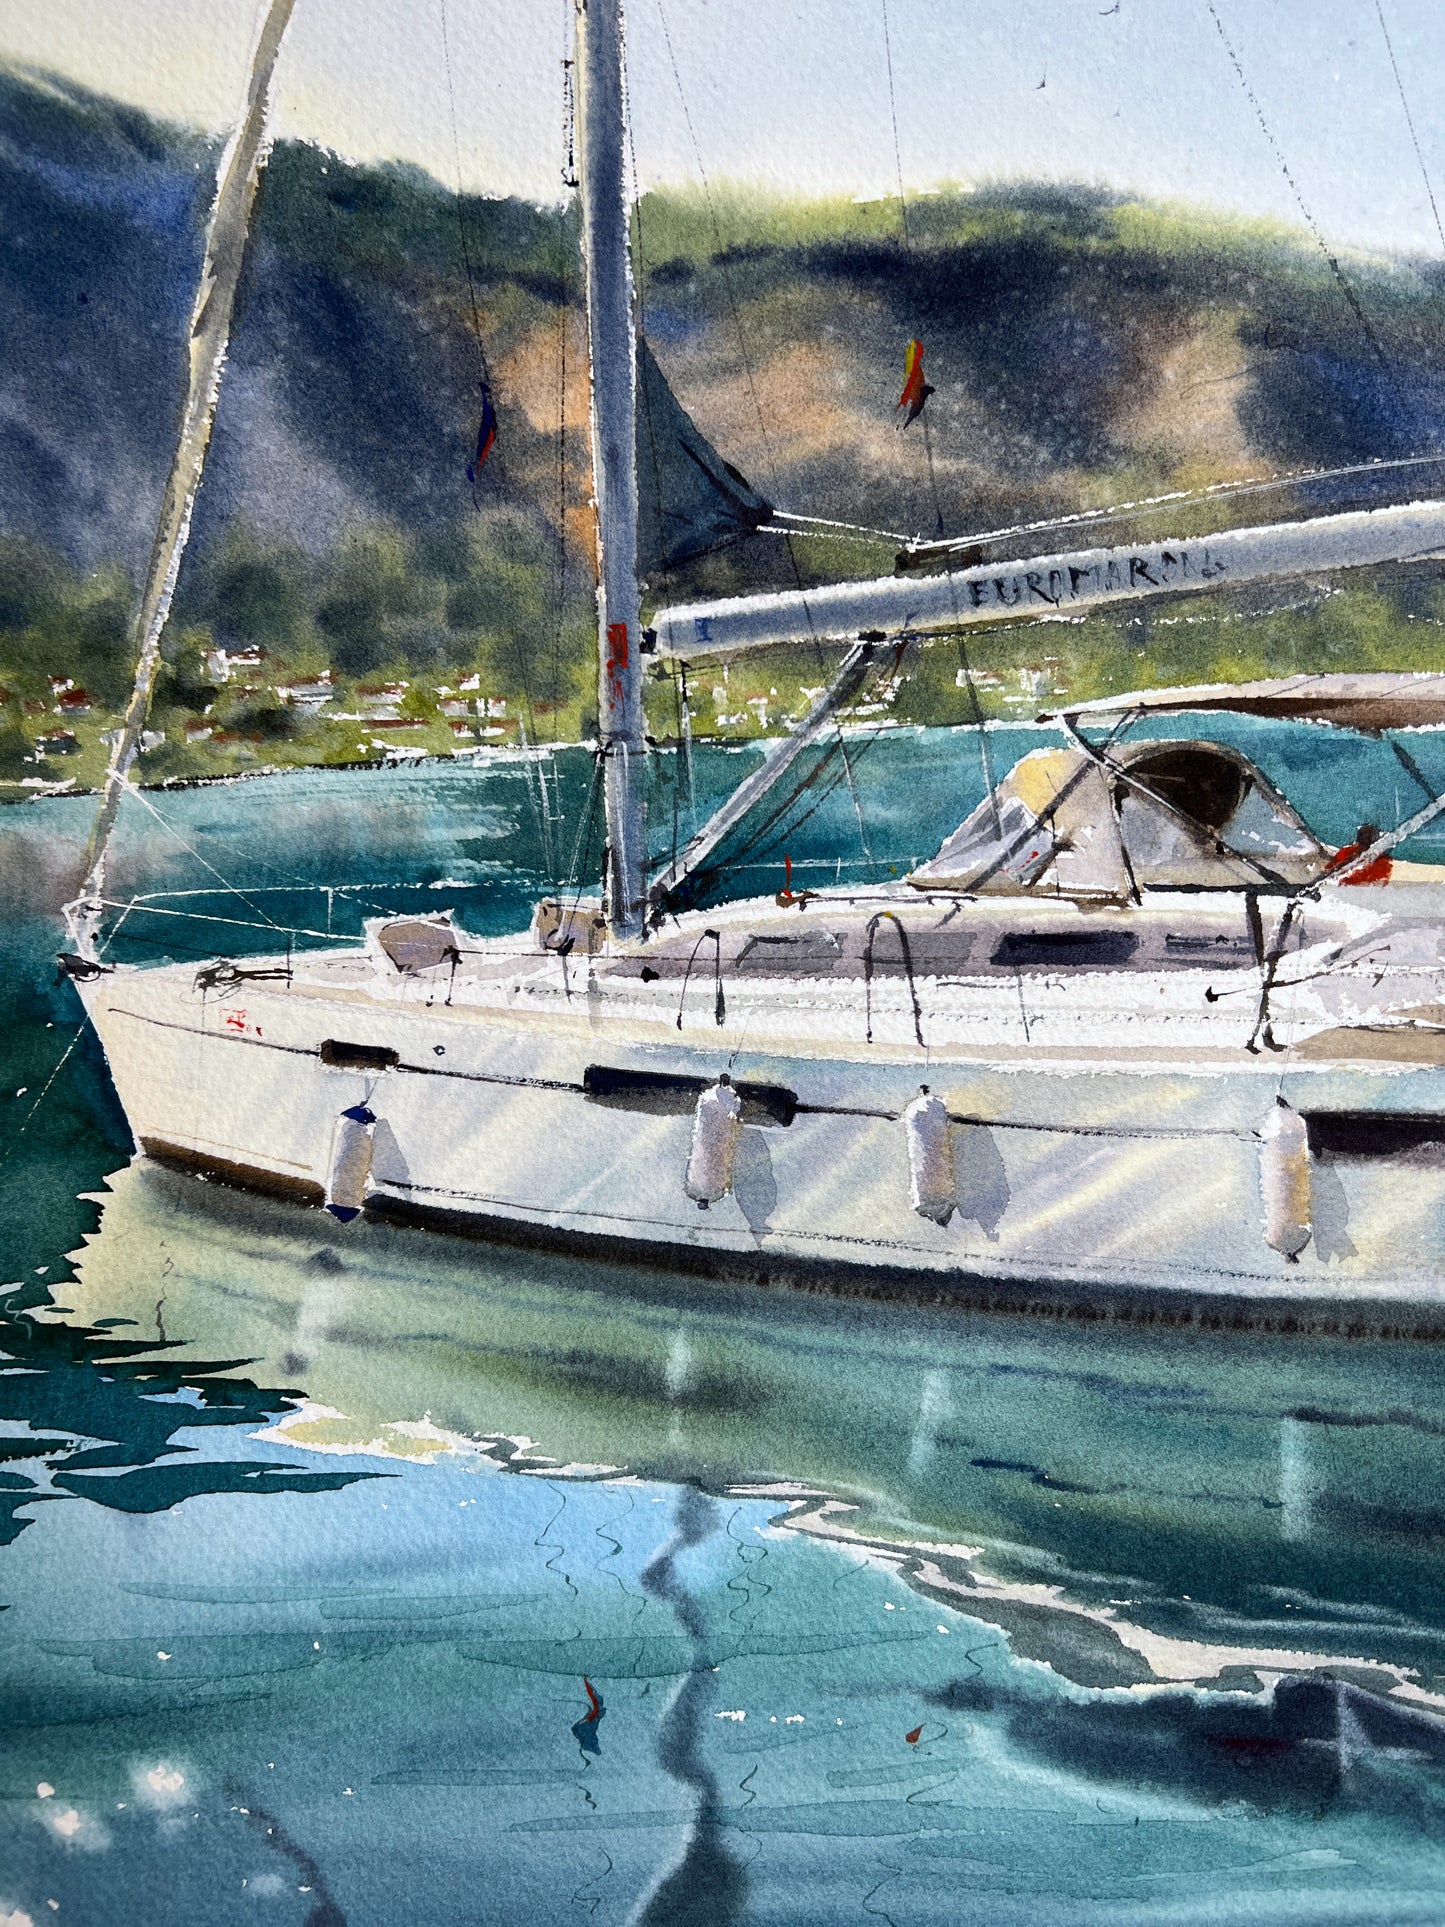 Painting Watercolor Original - Yacht on the pier. Montenegro - 15x22in